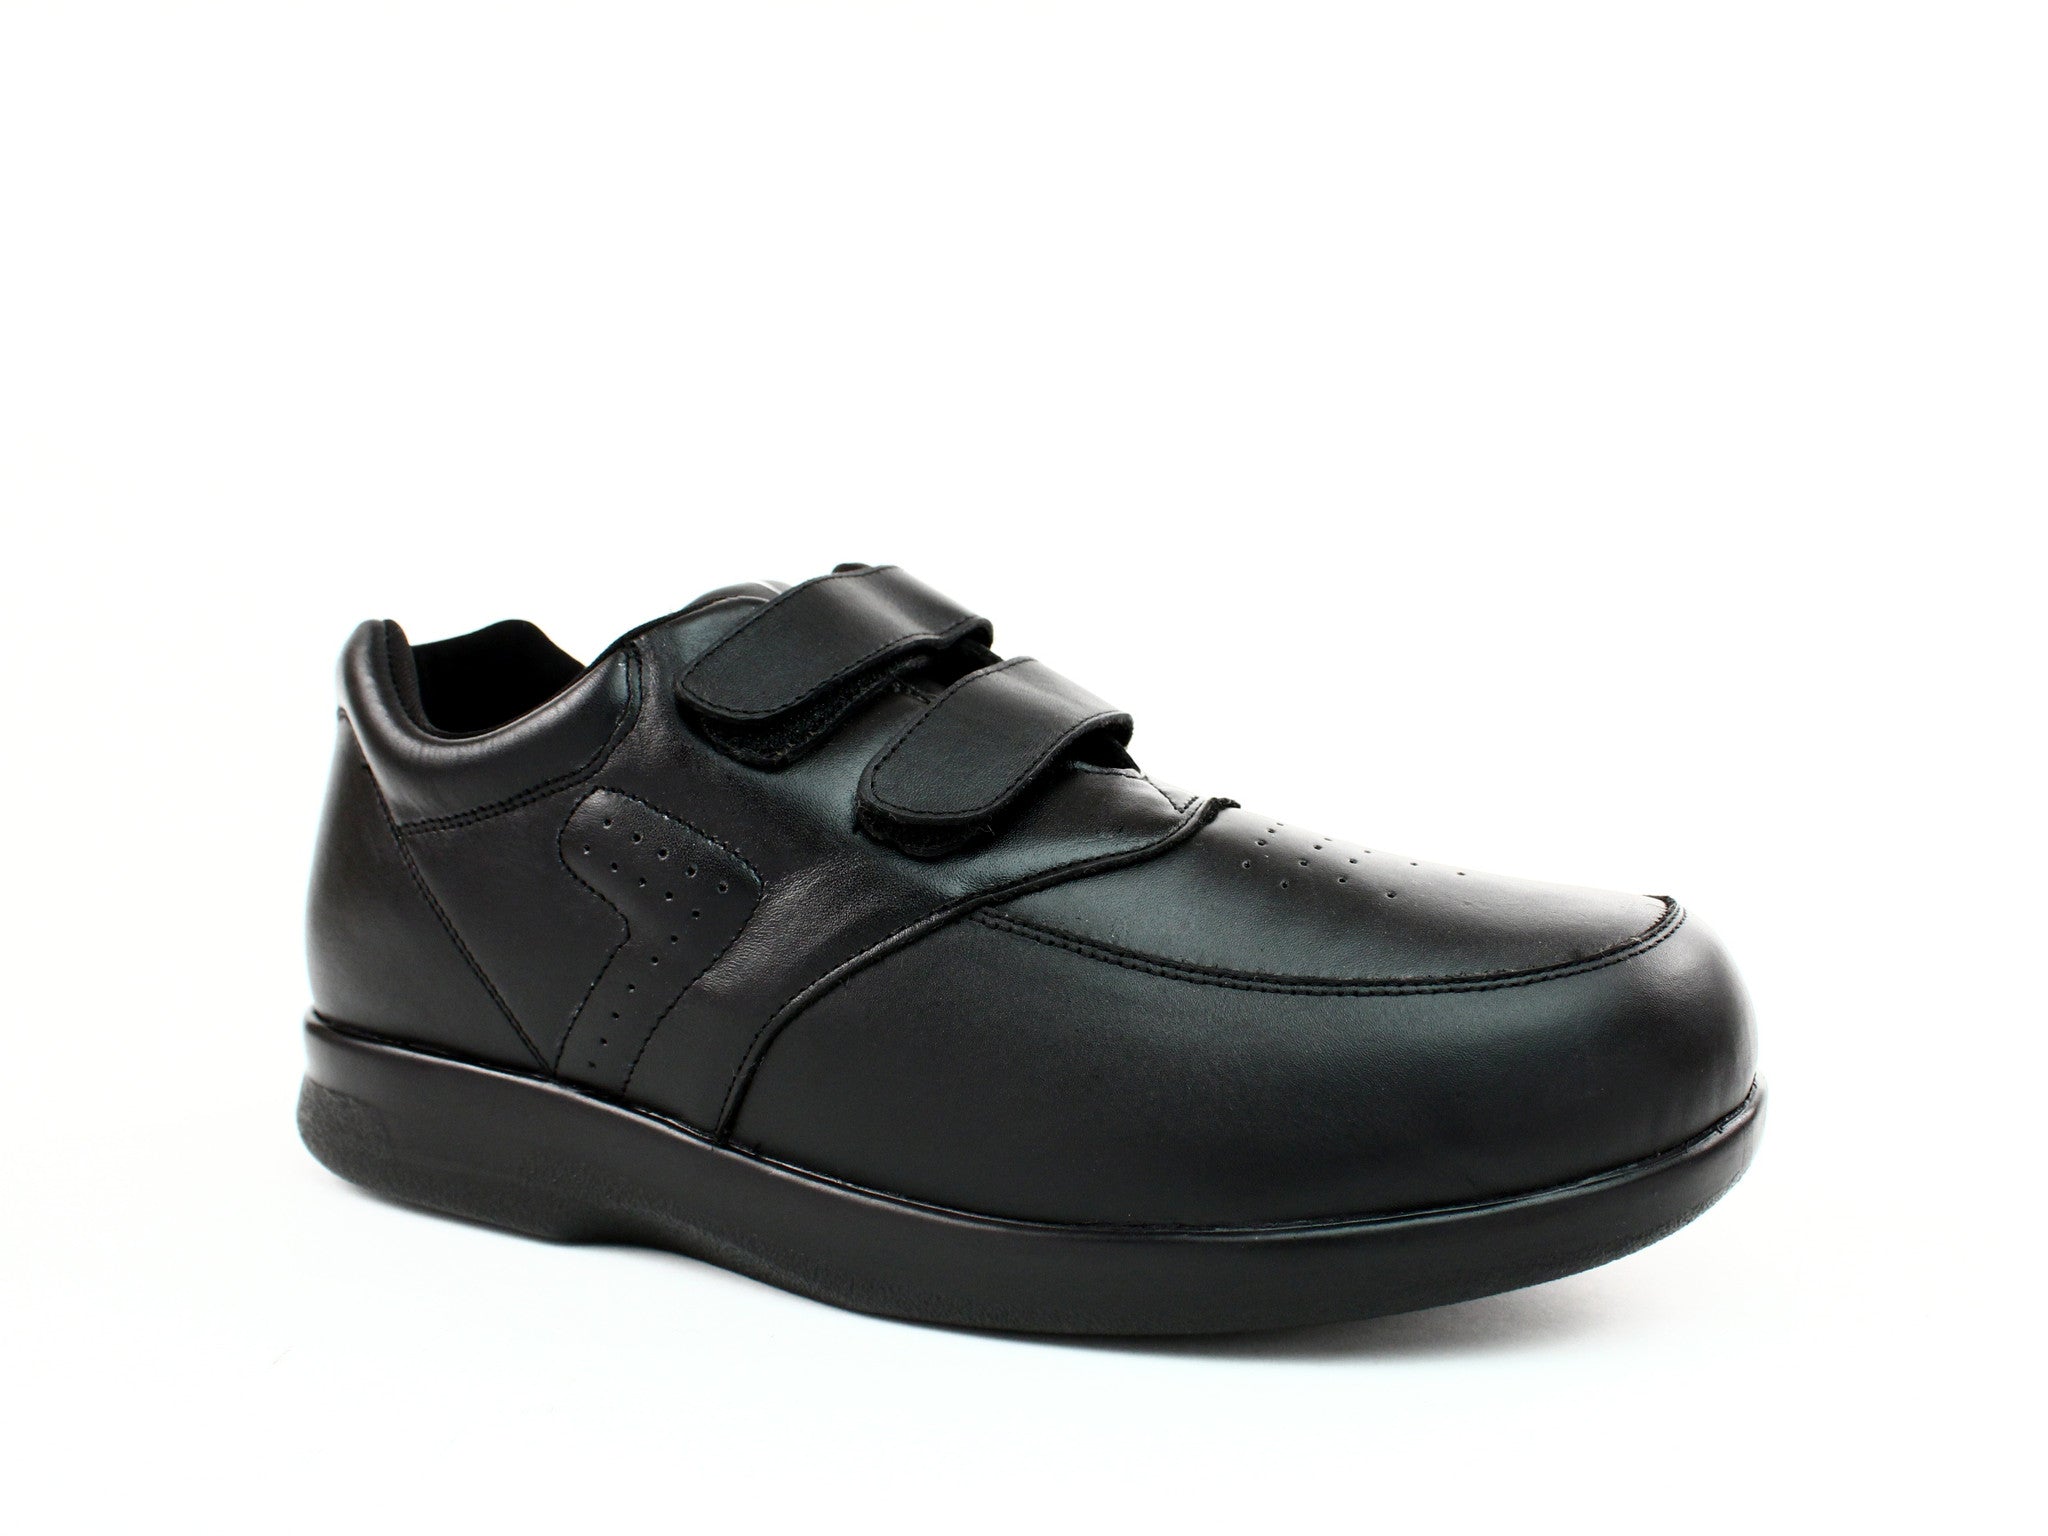 British Walkers Men's Black Leather Casual Shoes | eBay